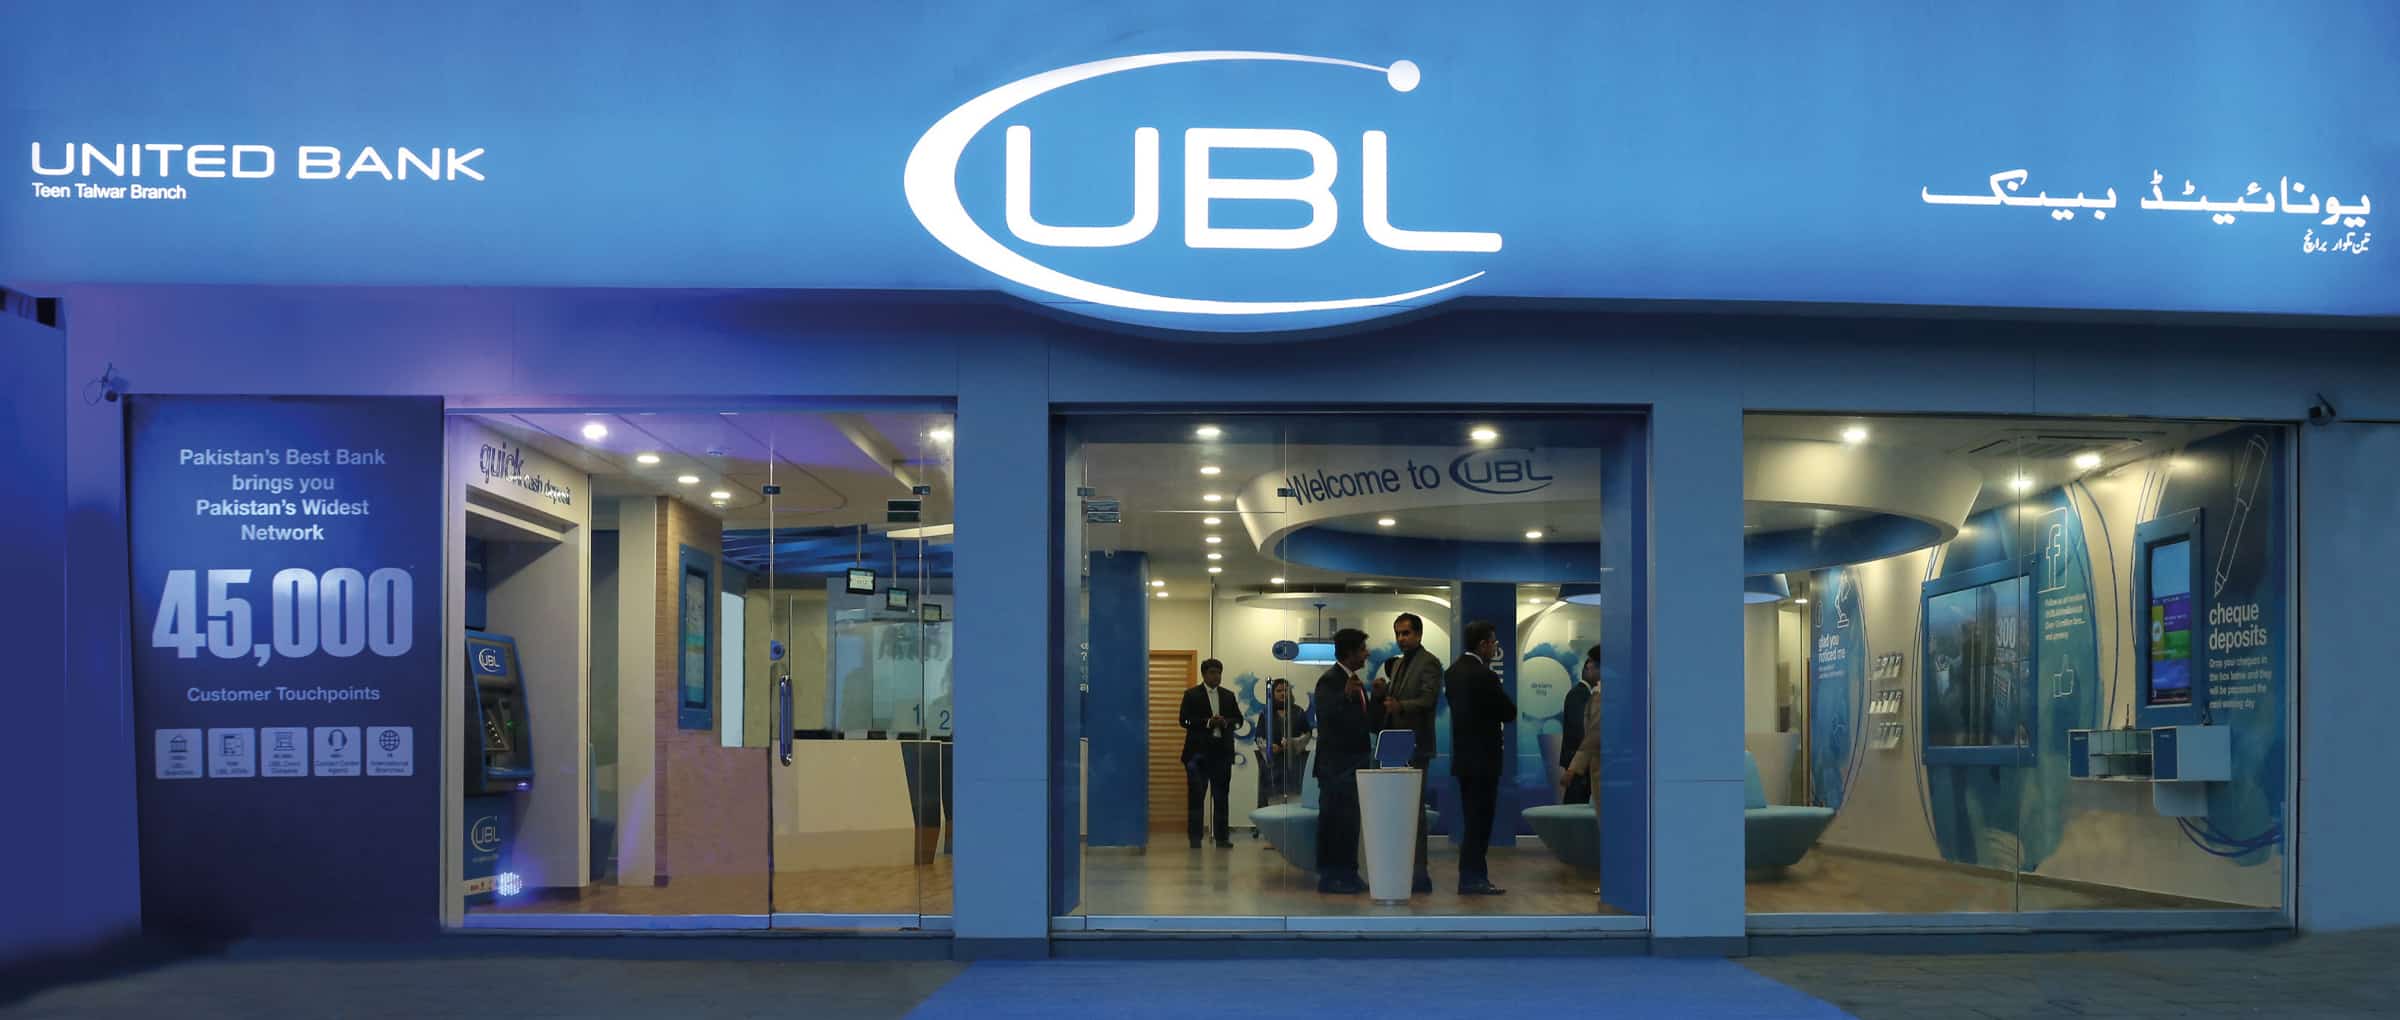 United Bank Limited branch